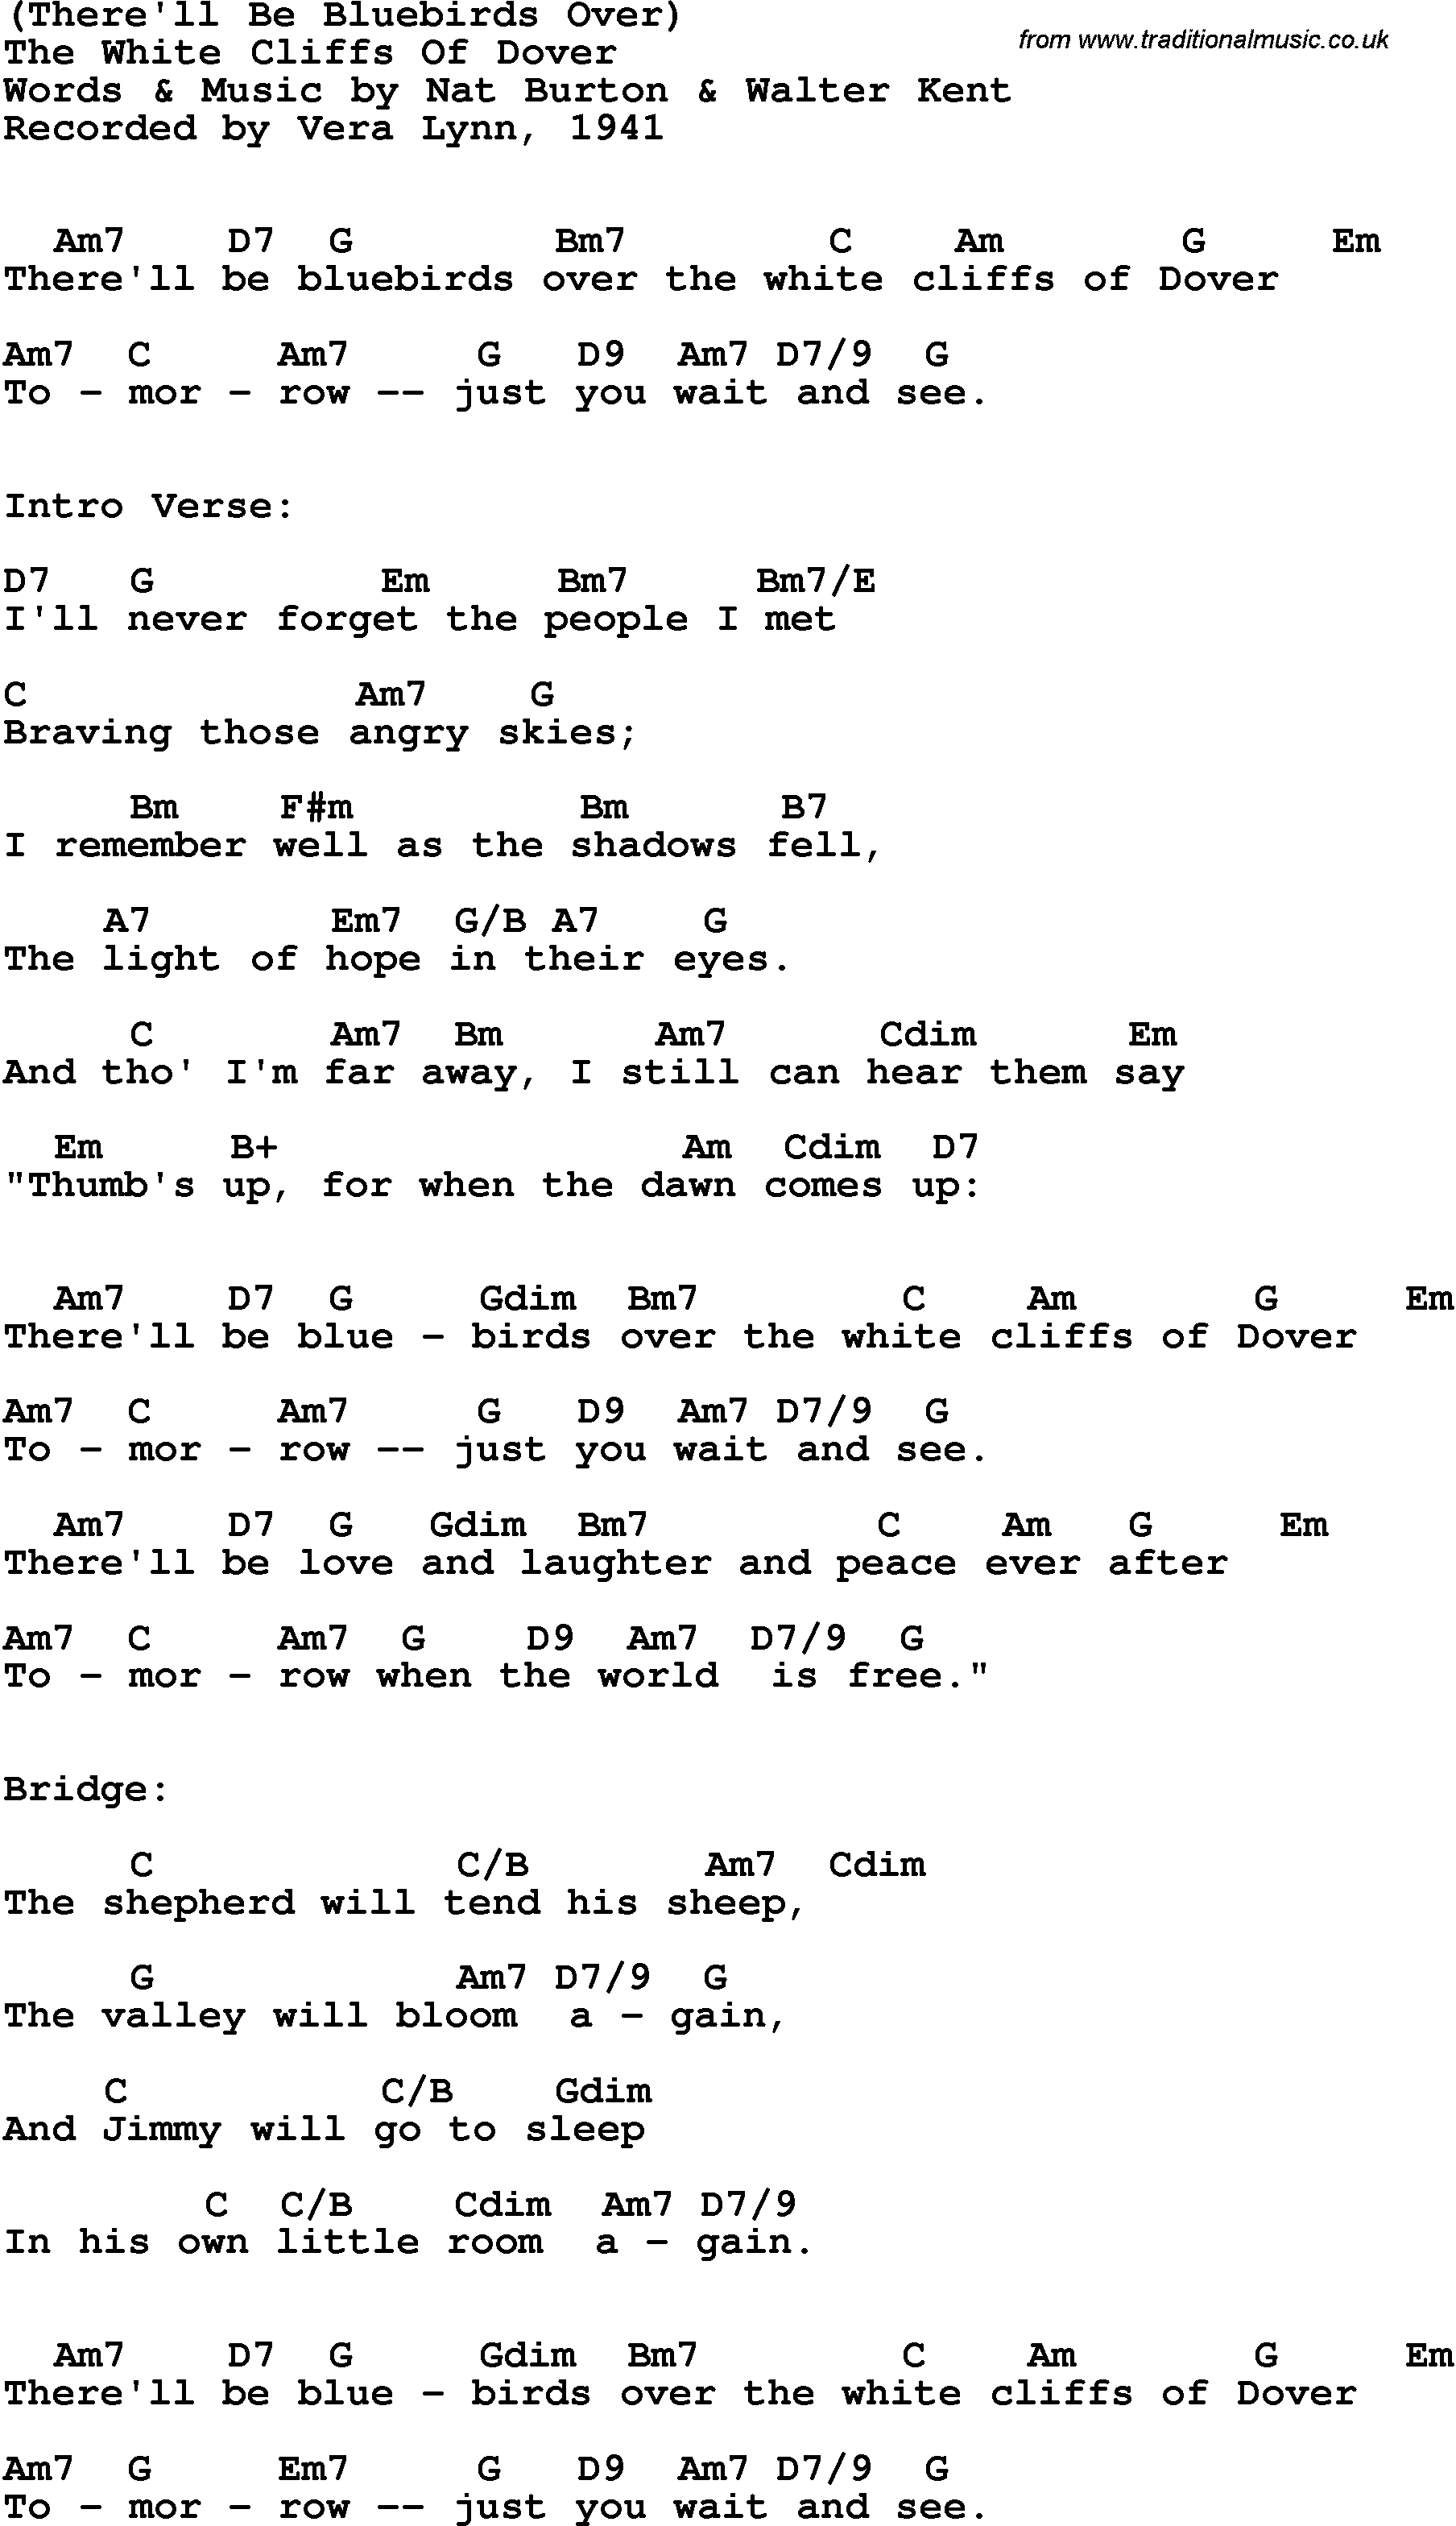 Song Lyrics with guitar chords for White Cliffs Of Dover - Vera Lynn, 1941